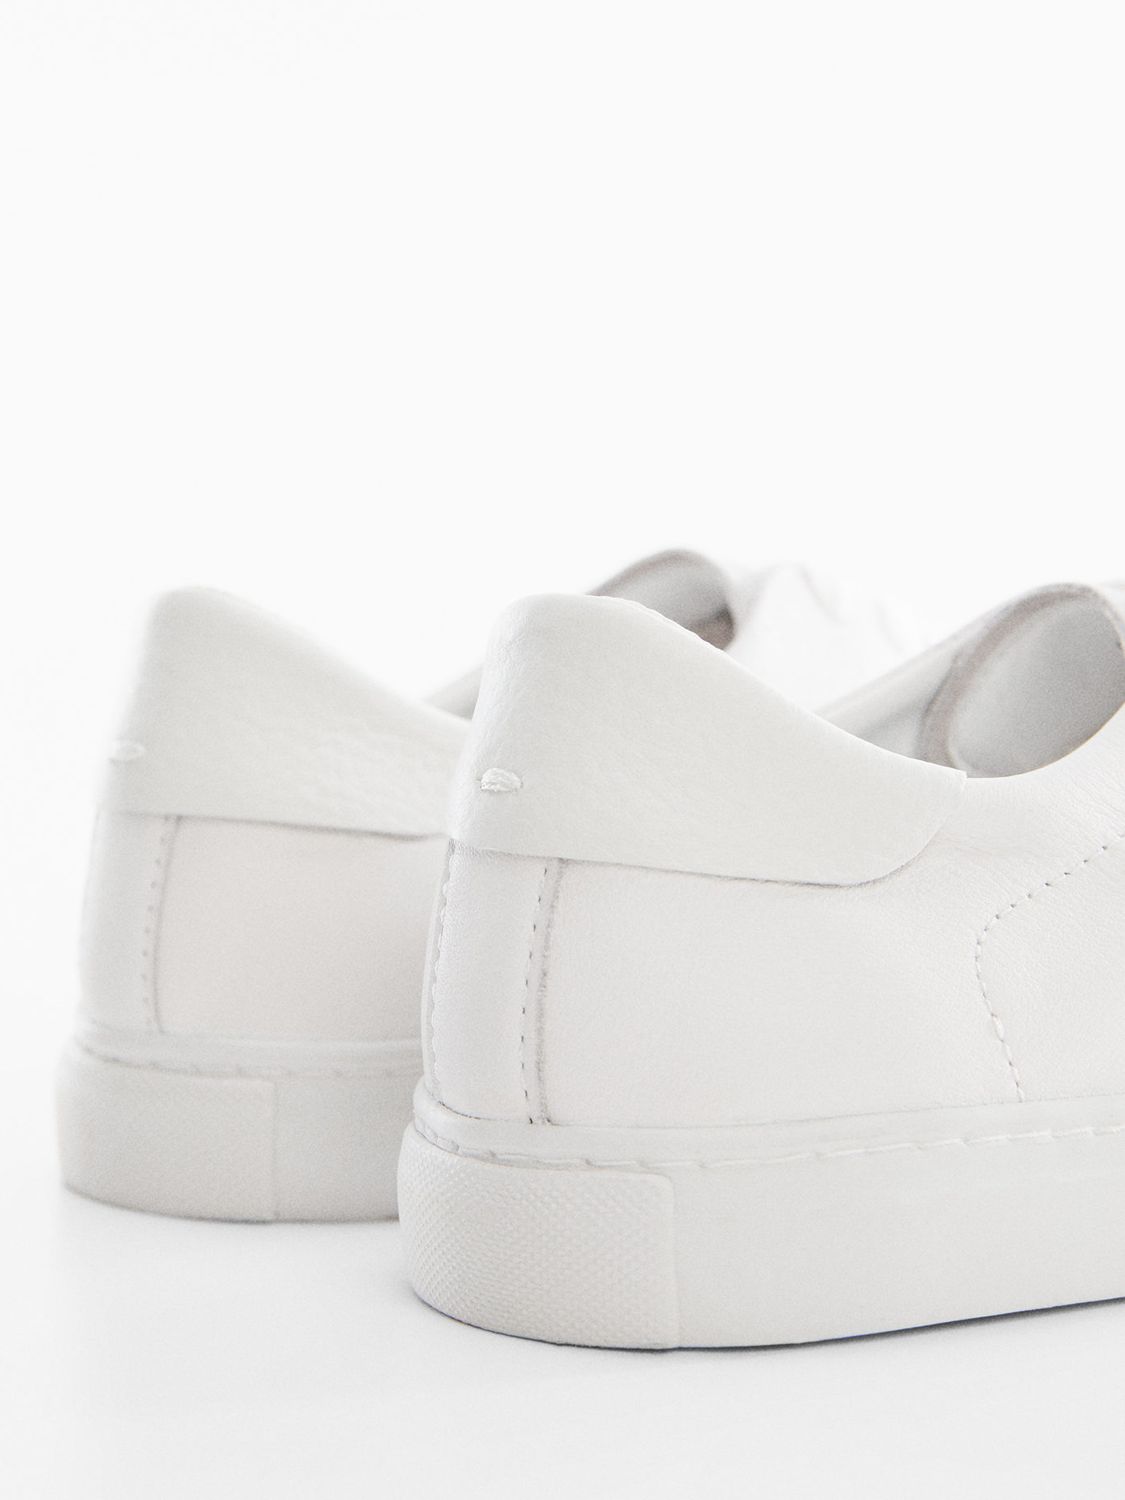 Mango Base Low Top Leather Trainers, White at John Lewis & Partners